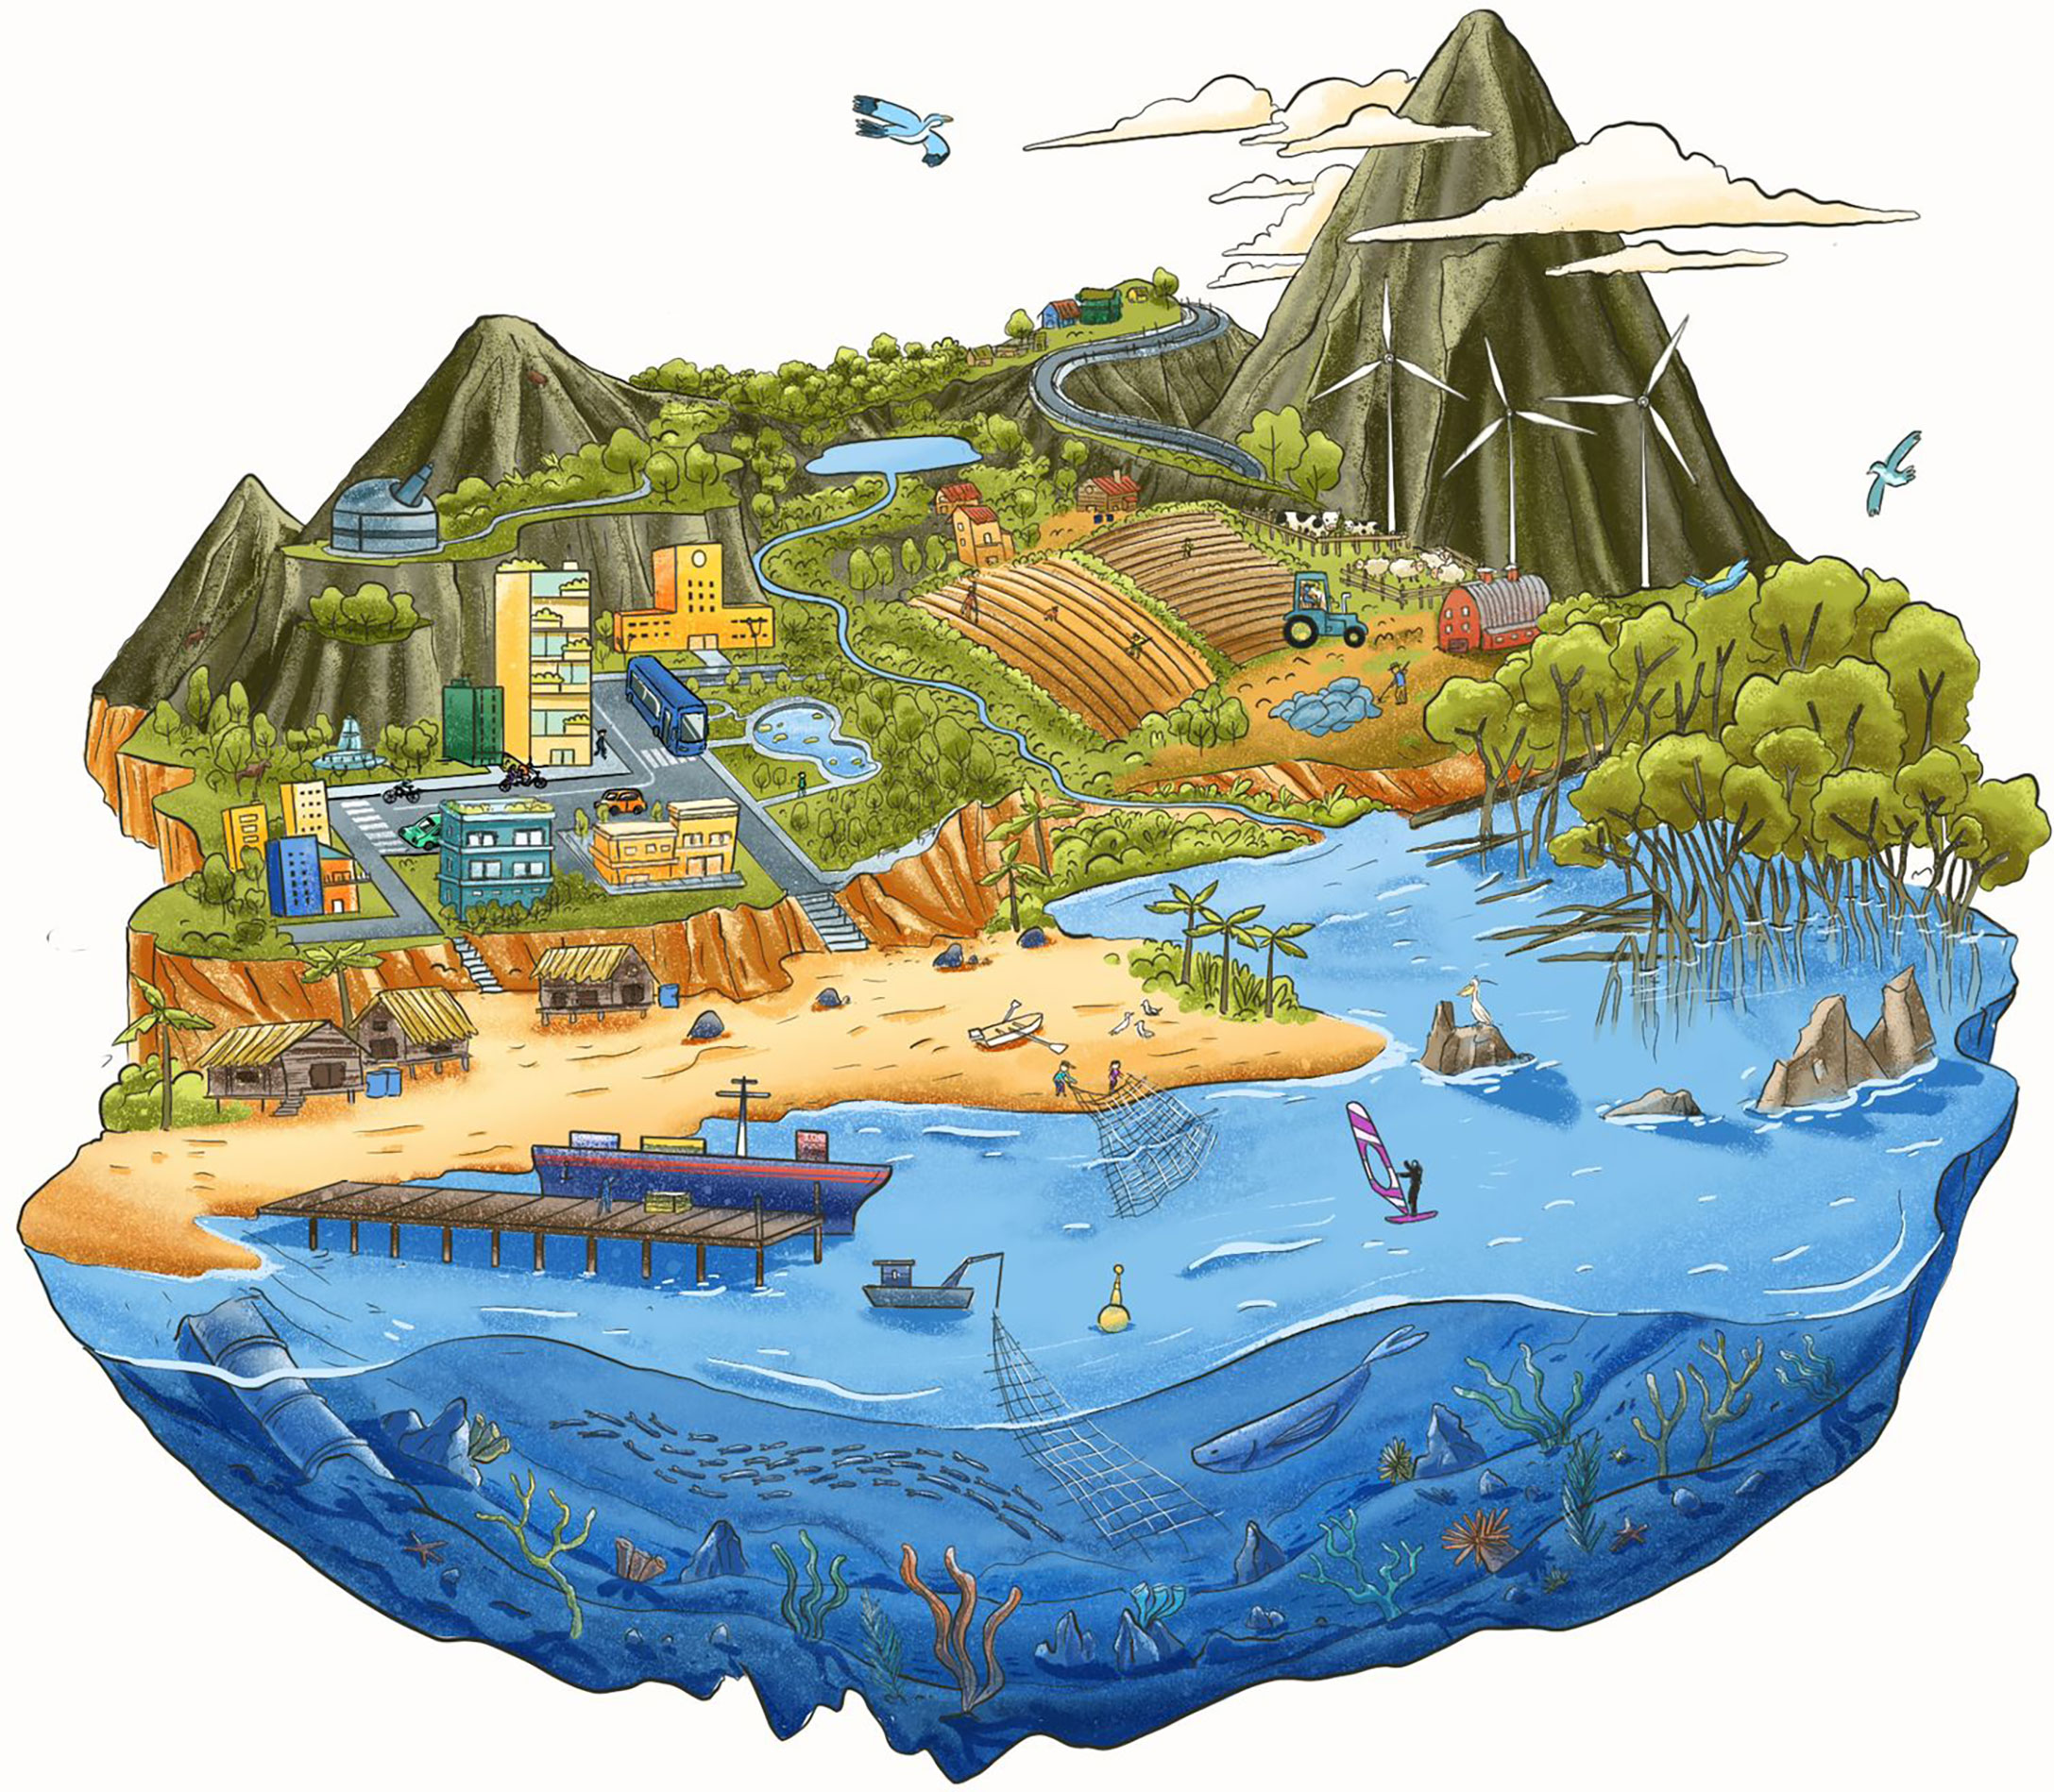 An illustration of a “working” landscape and seascape from mountains and forests to a coastal community.